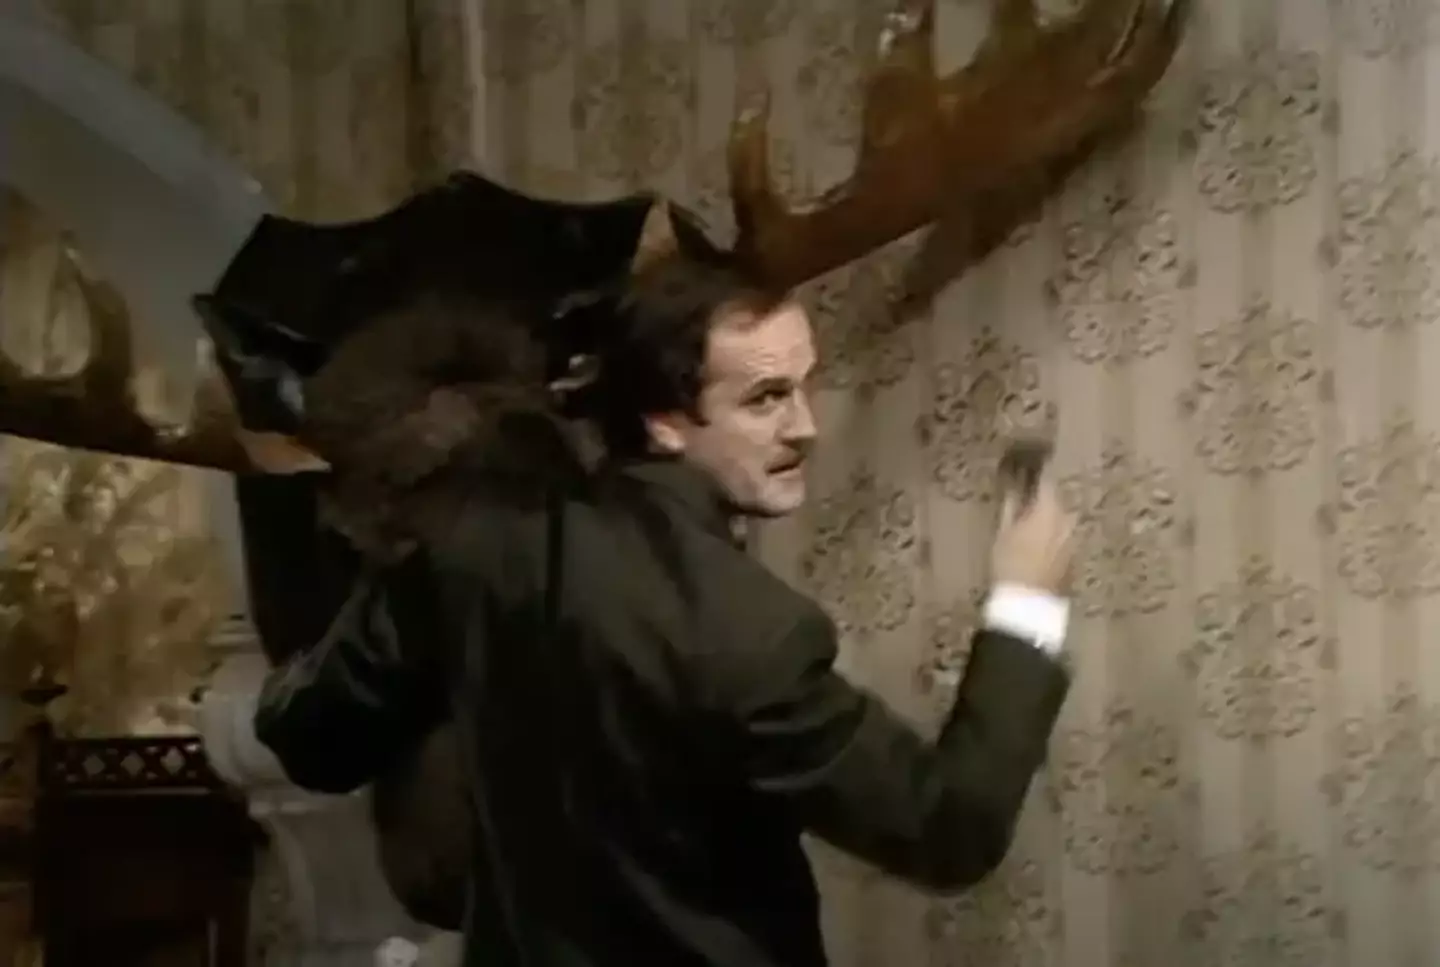 There's only one Fawlty Towers scene that Cleese regrets playing.